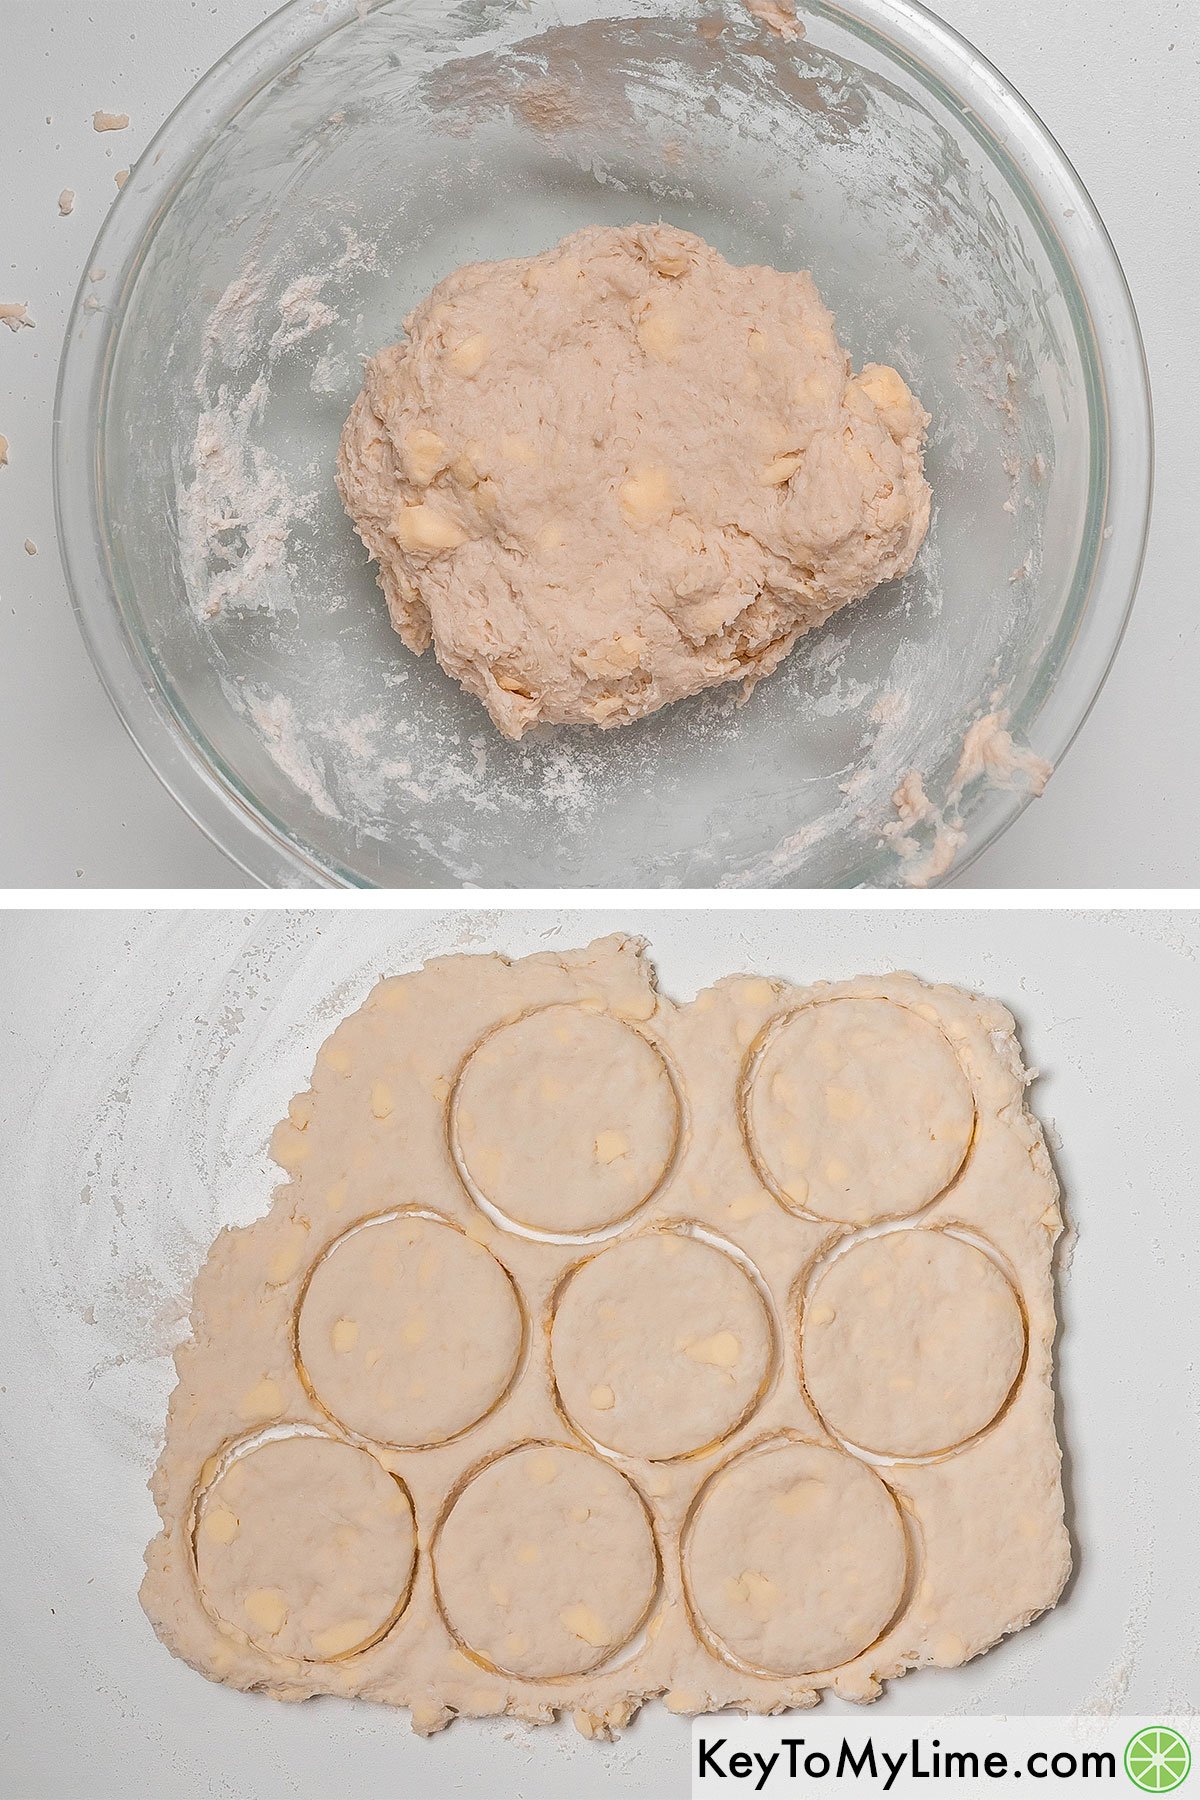 Forming the dough in a bowl and stretch and folding then once done rolling out and cutting into circles.